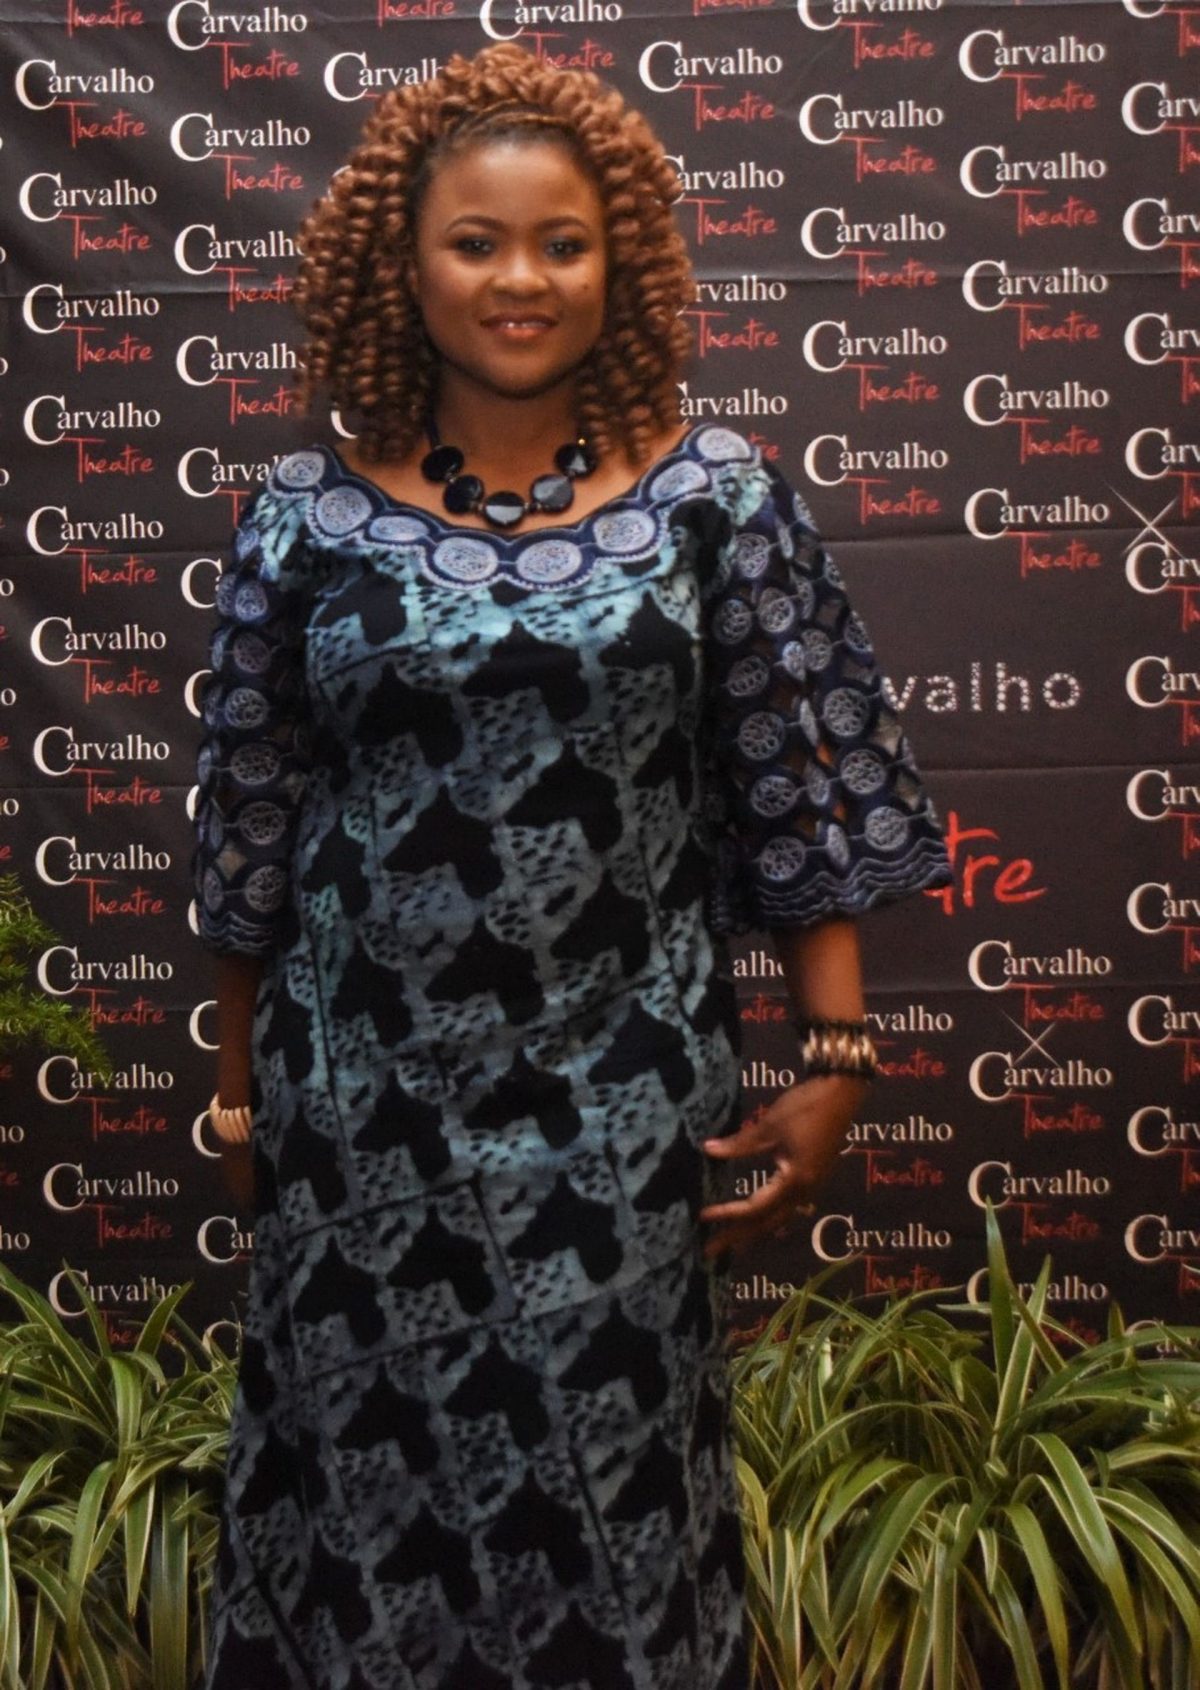 Minister of Community Development, Culture and the Arts Dr Nyan Gadsby-Dolly in attendance at the gala premiere of Taxi Cab Confessions Queen’s Hall. (Courtesy Fareid Carvalho)